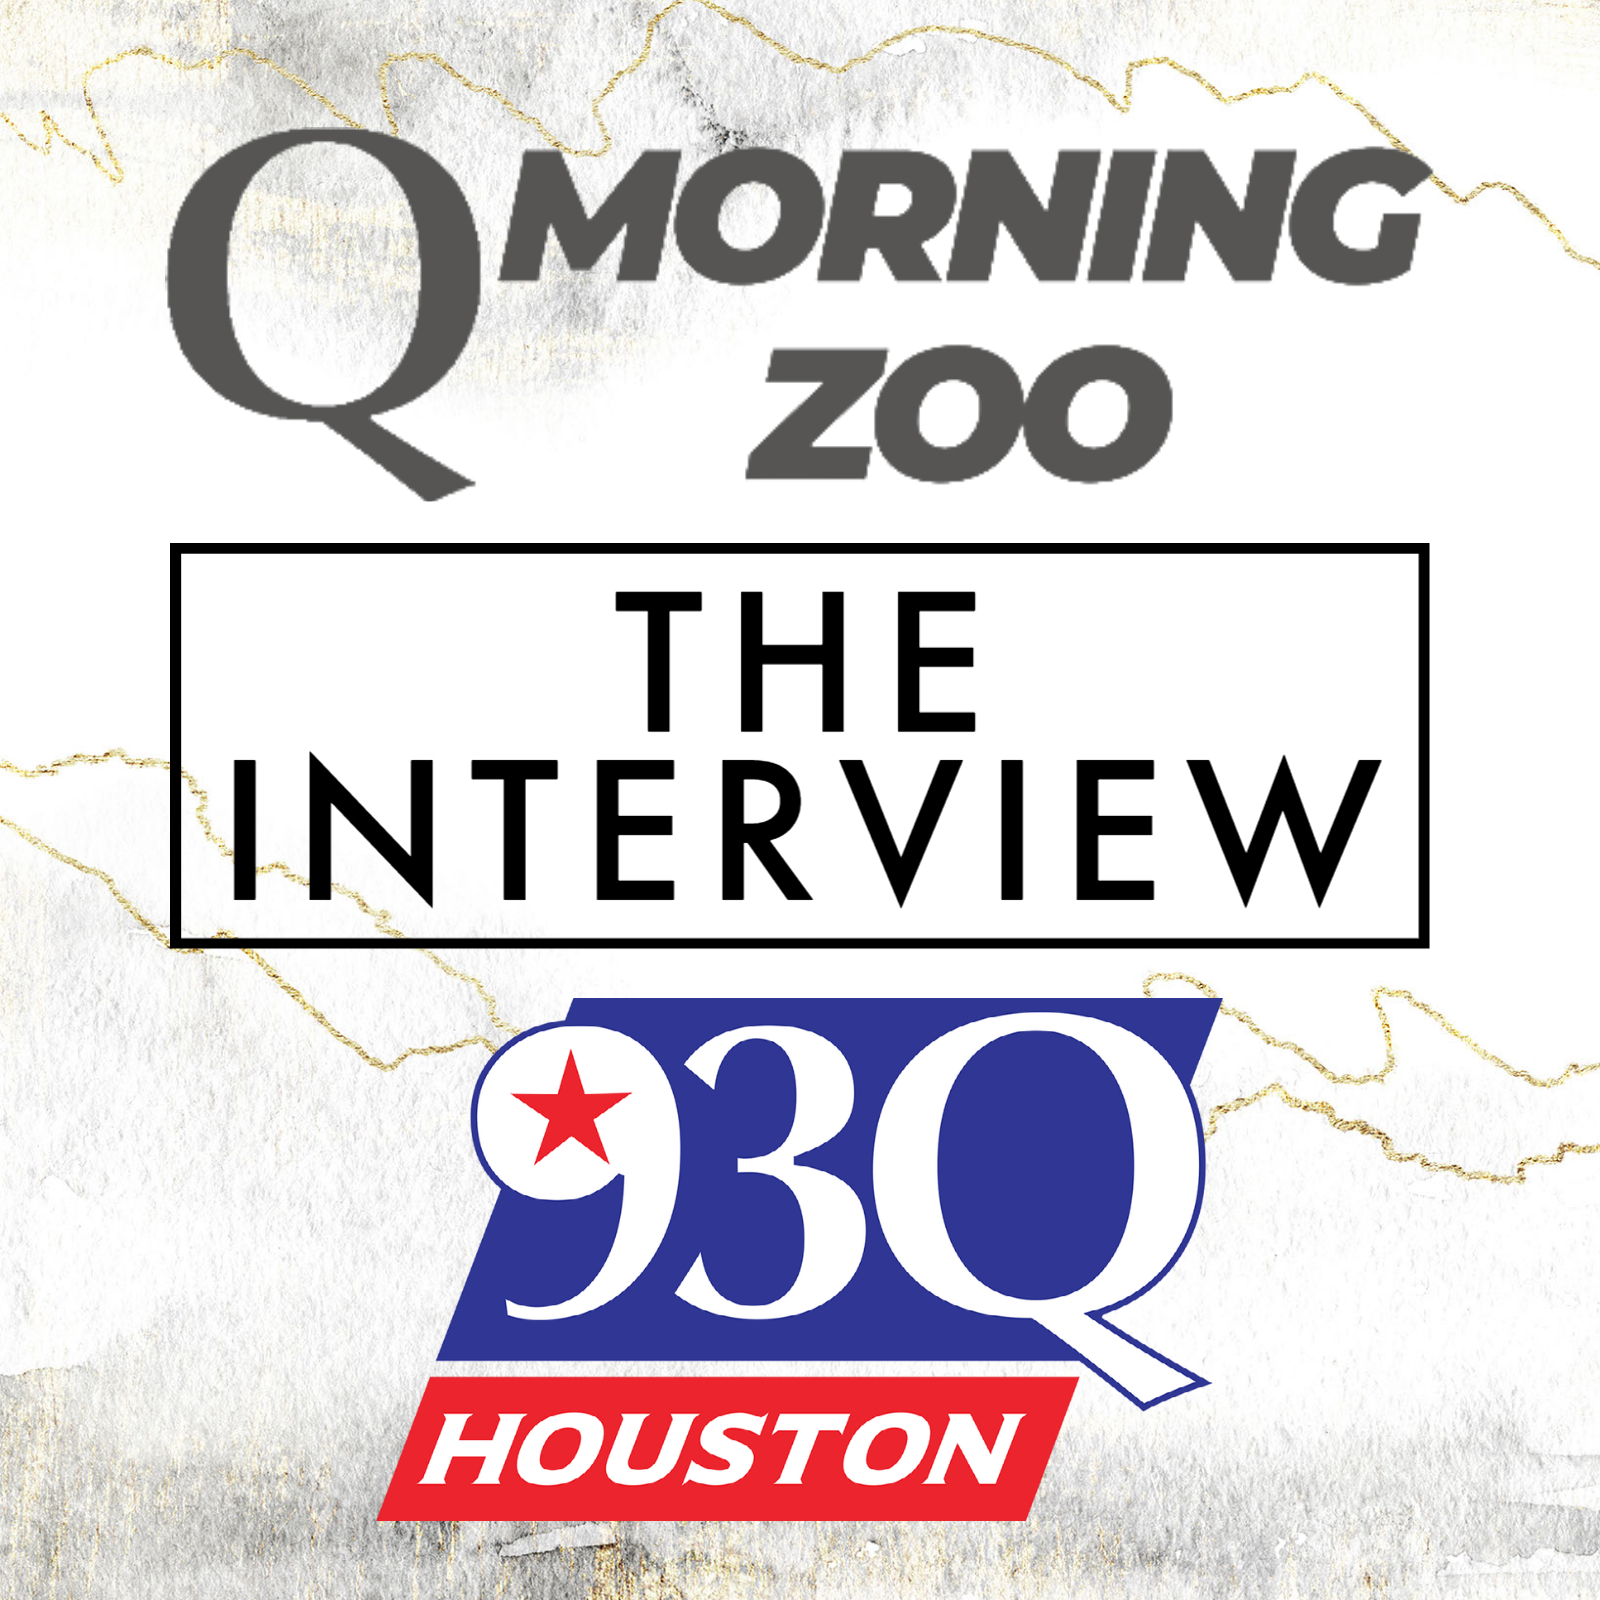 Q Morning Zoo  - The Interview